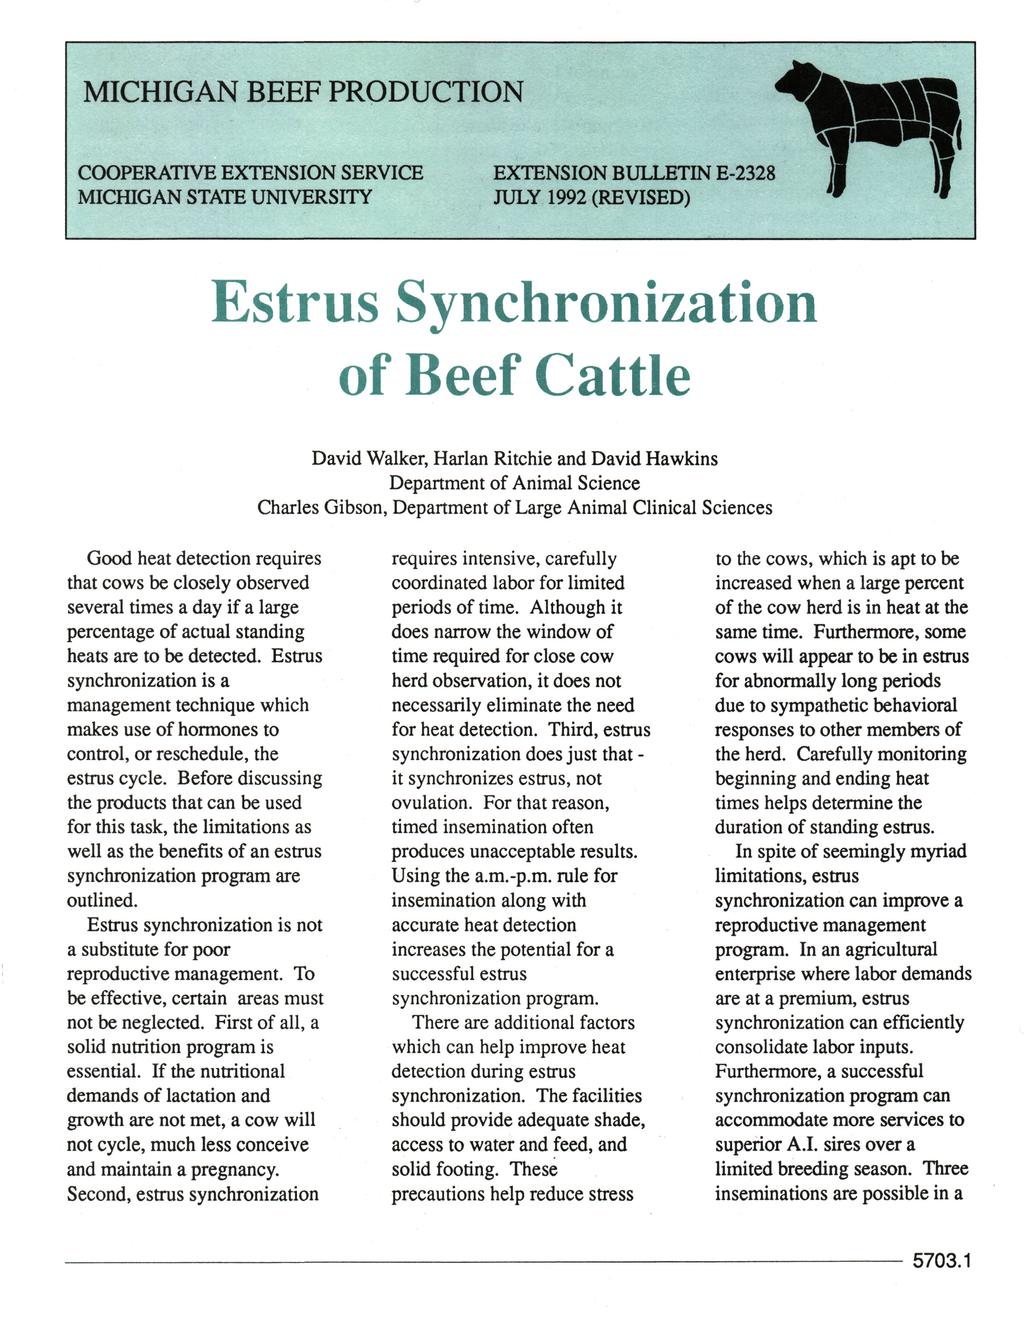 MICHIGAN BEEF PRODUCTION COOPERATIVE EXTENSION SERVICE MICHIGAN STATE UNIVERSITY EXTENSION BULLETIN E-2328 JULY 1992 (REVISED) Estrus Synchronization of Beef Cattle David Walker, Harlan Ritchie and